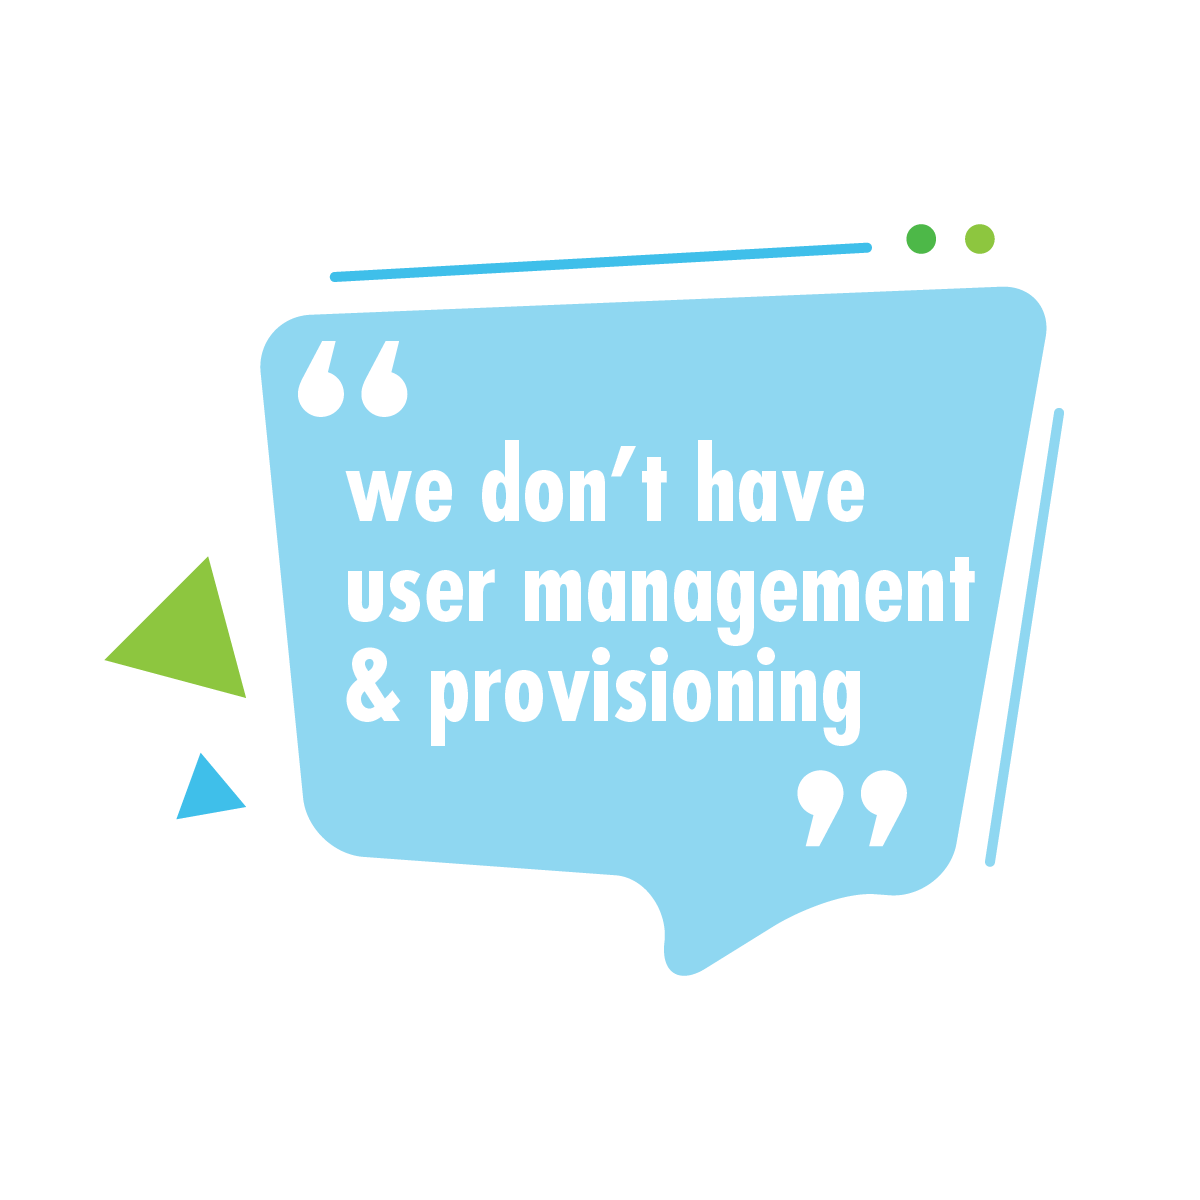 "We don't have user management and provisioning."